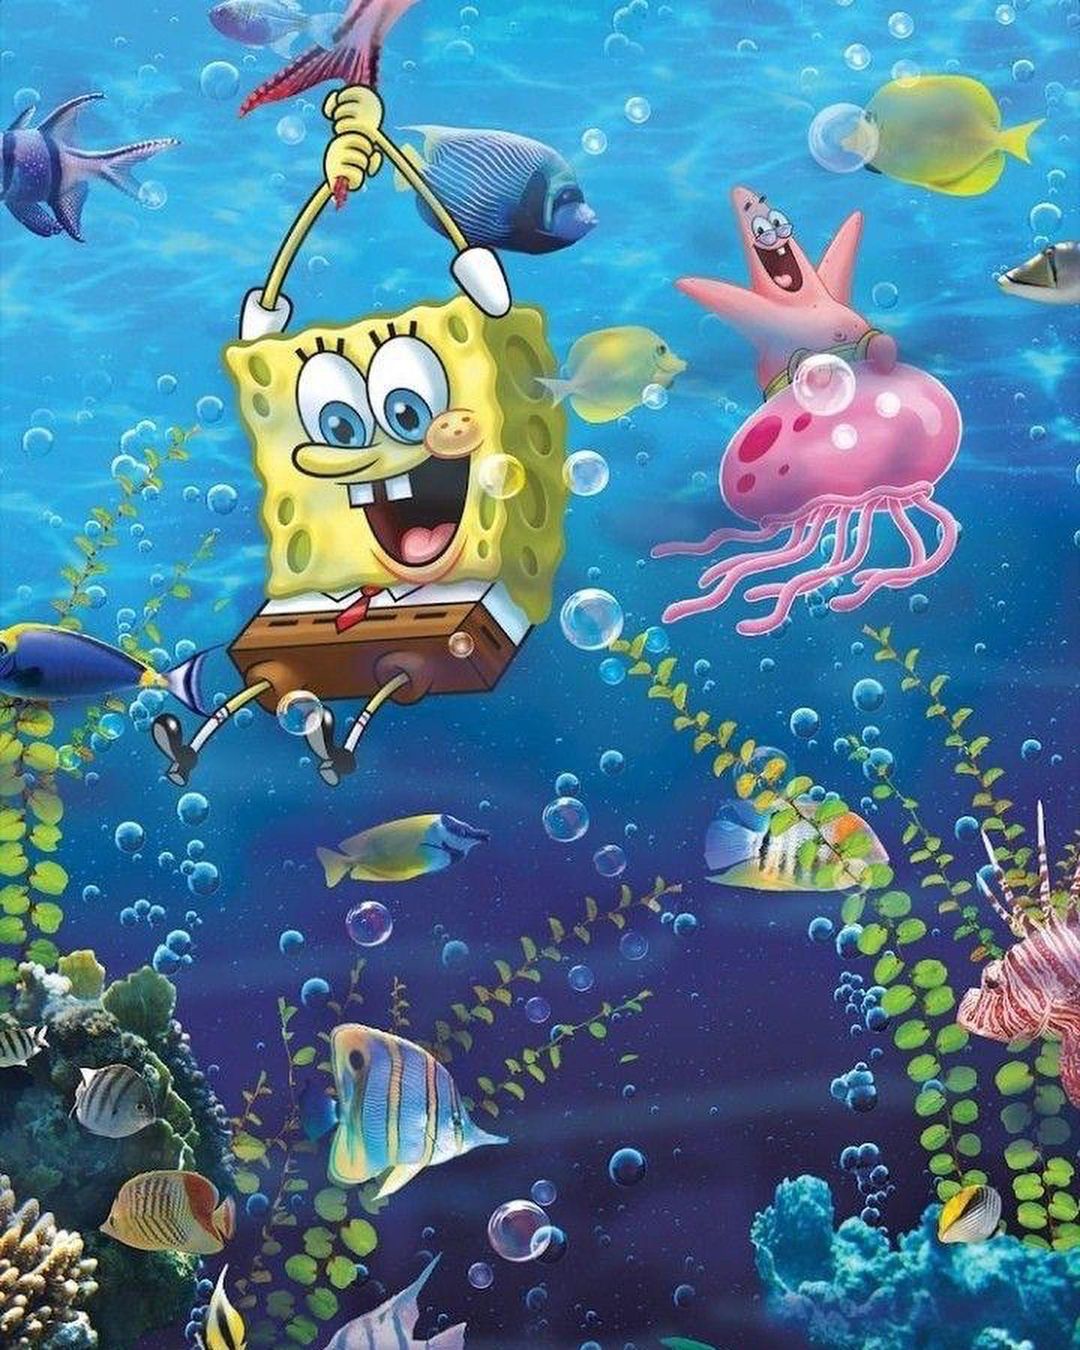 SpongeBob clings on a tail of a fish and Patrick rides on a giant pink jellyfish as different fishes swim everywhere